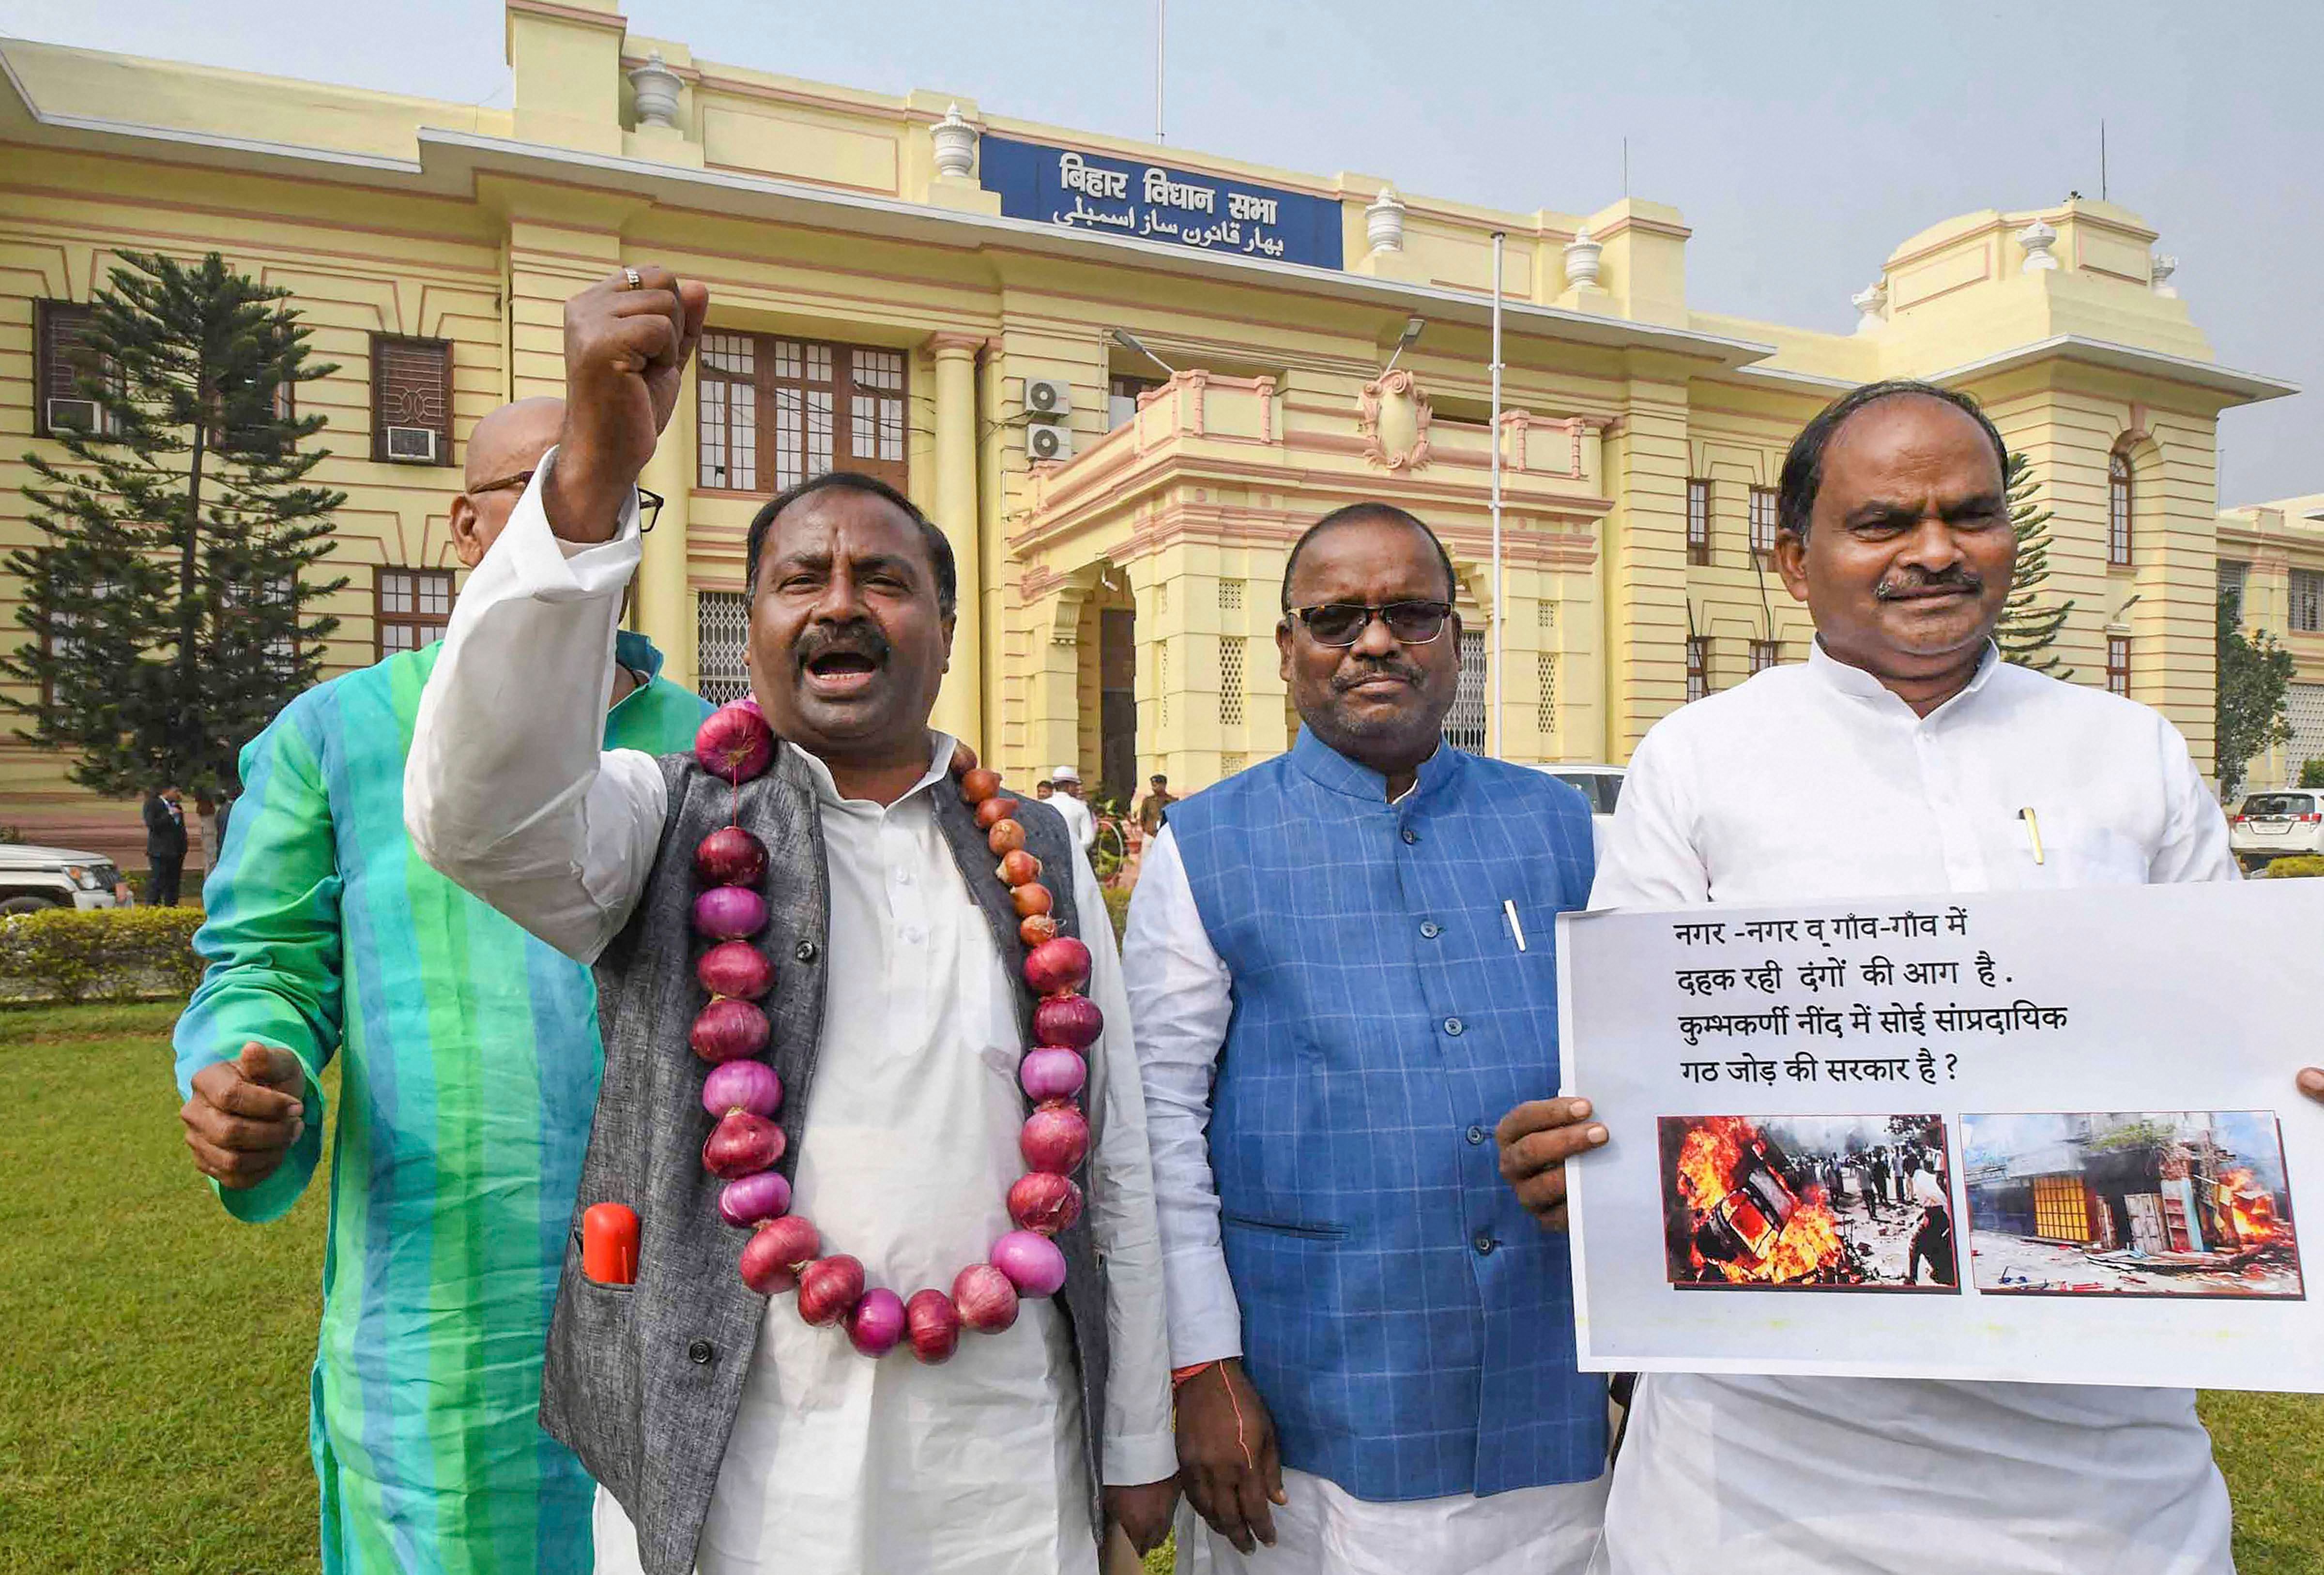 RJD MLA Shiv Chandra Ram raise slogans during a demonstration against the government for failing to control soaring prices of onions during the ongoing Winter Session of Bihar Assembly, in Patna. (PTI Photo)